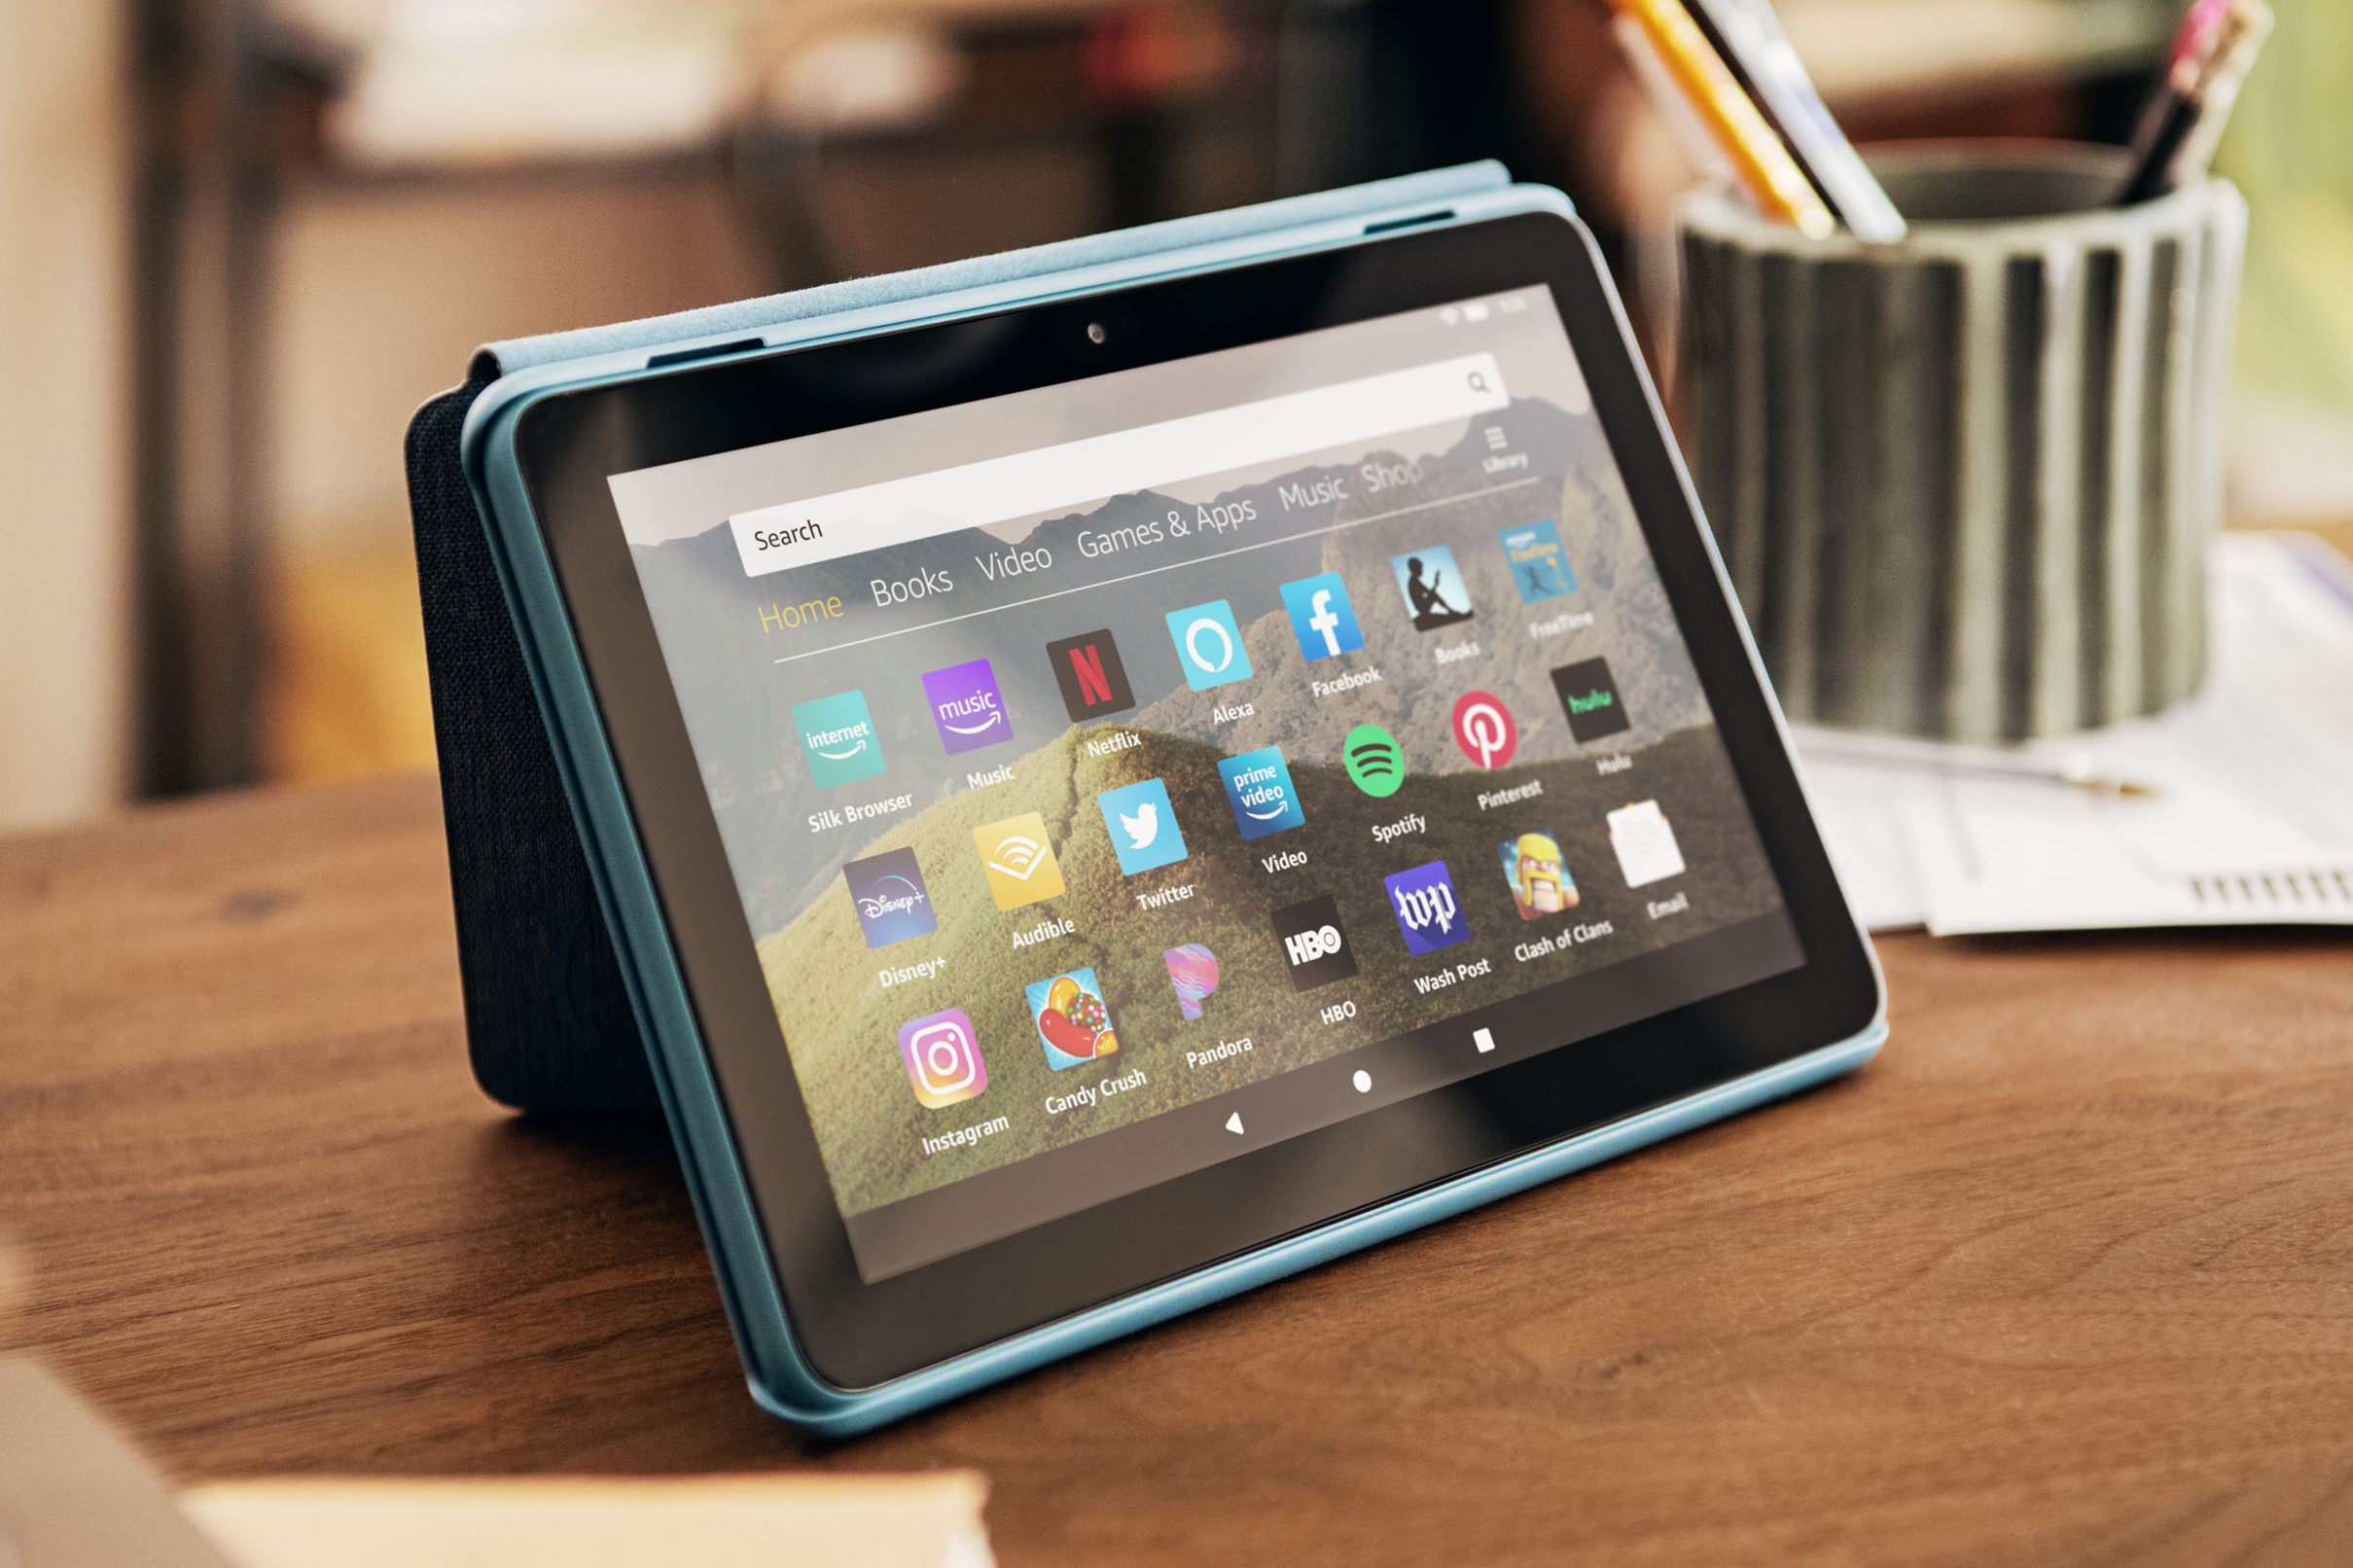 Fire HD 8 (2020) review: A tablet for  lovers, and no